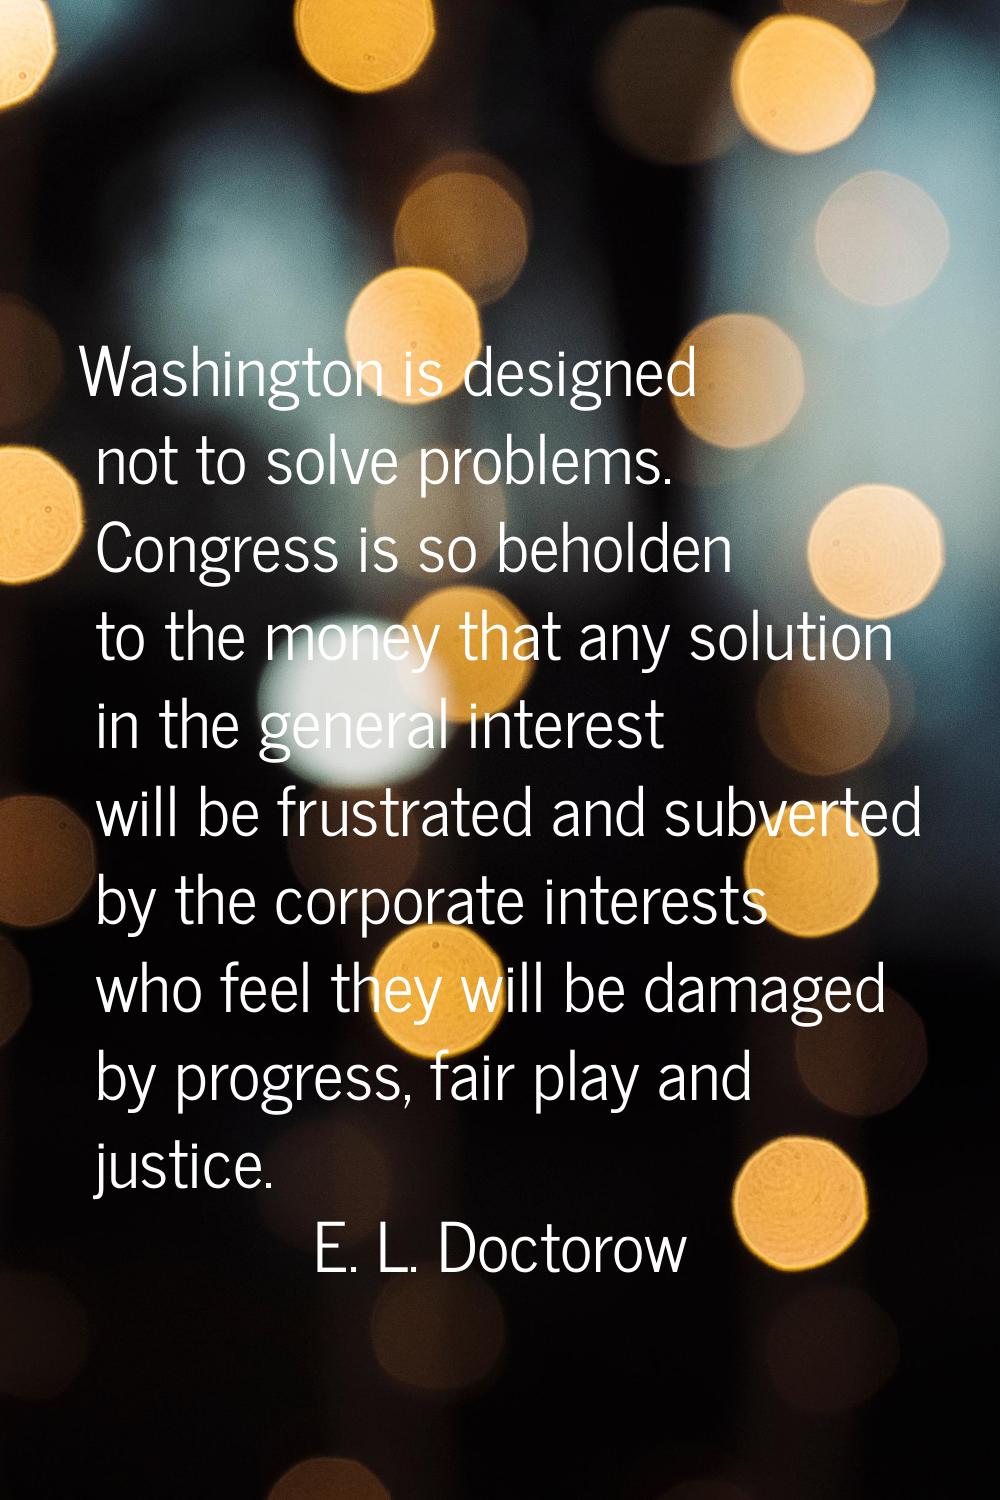 Washington is designed not to solve problems. Congress is so beholden to the money that any solutio